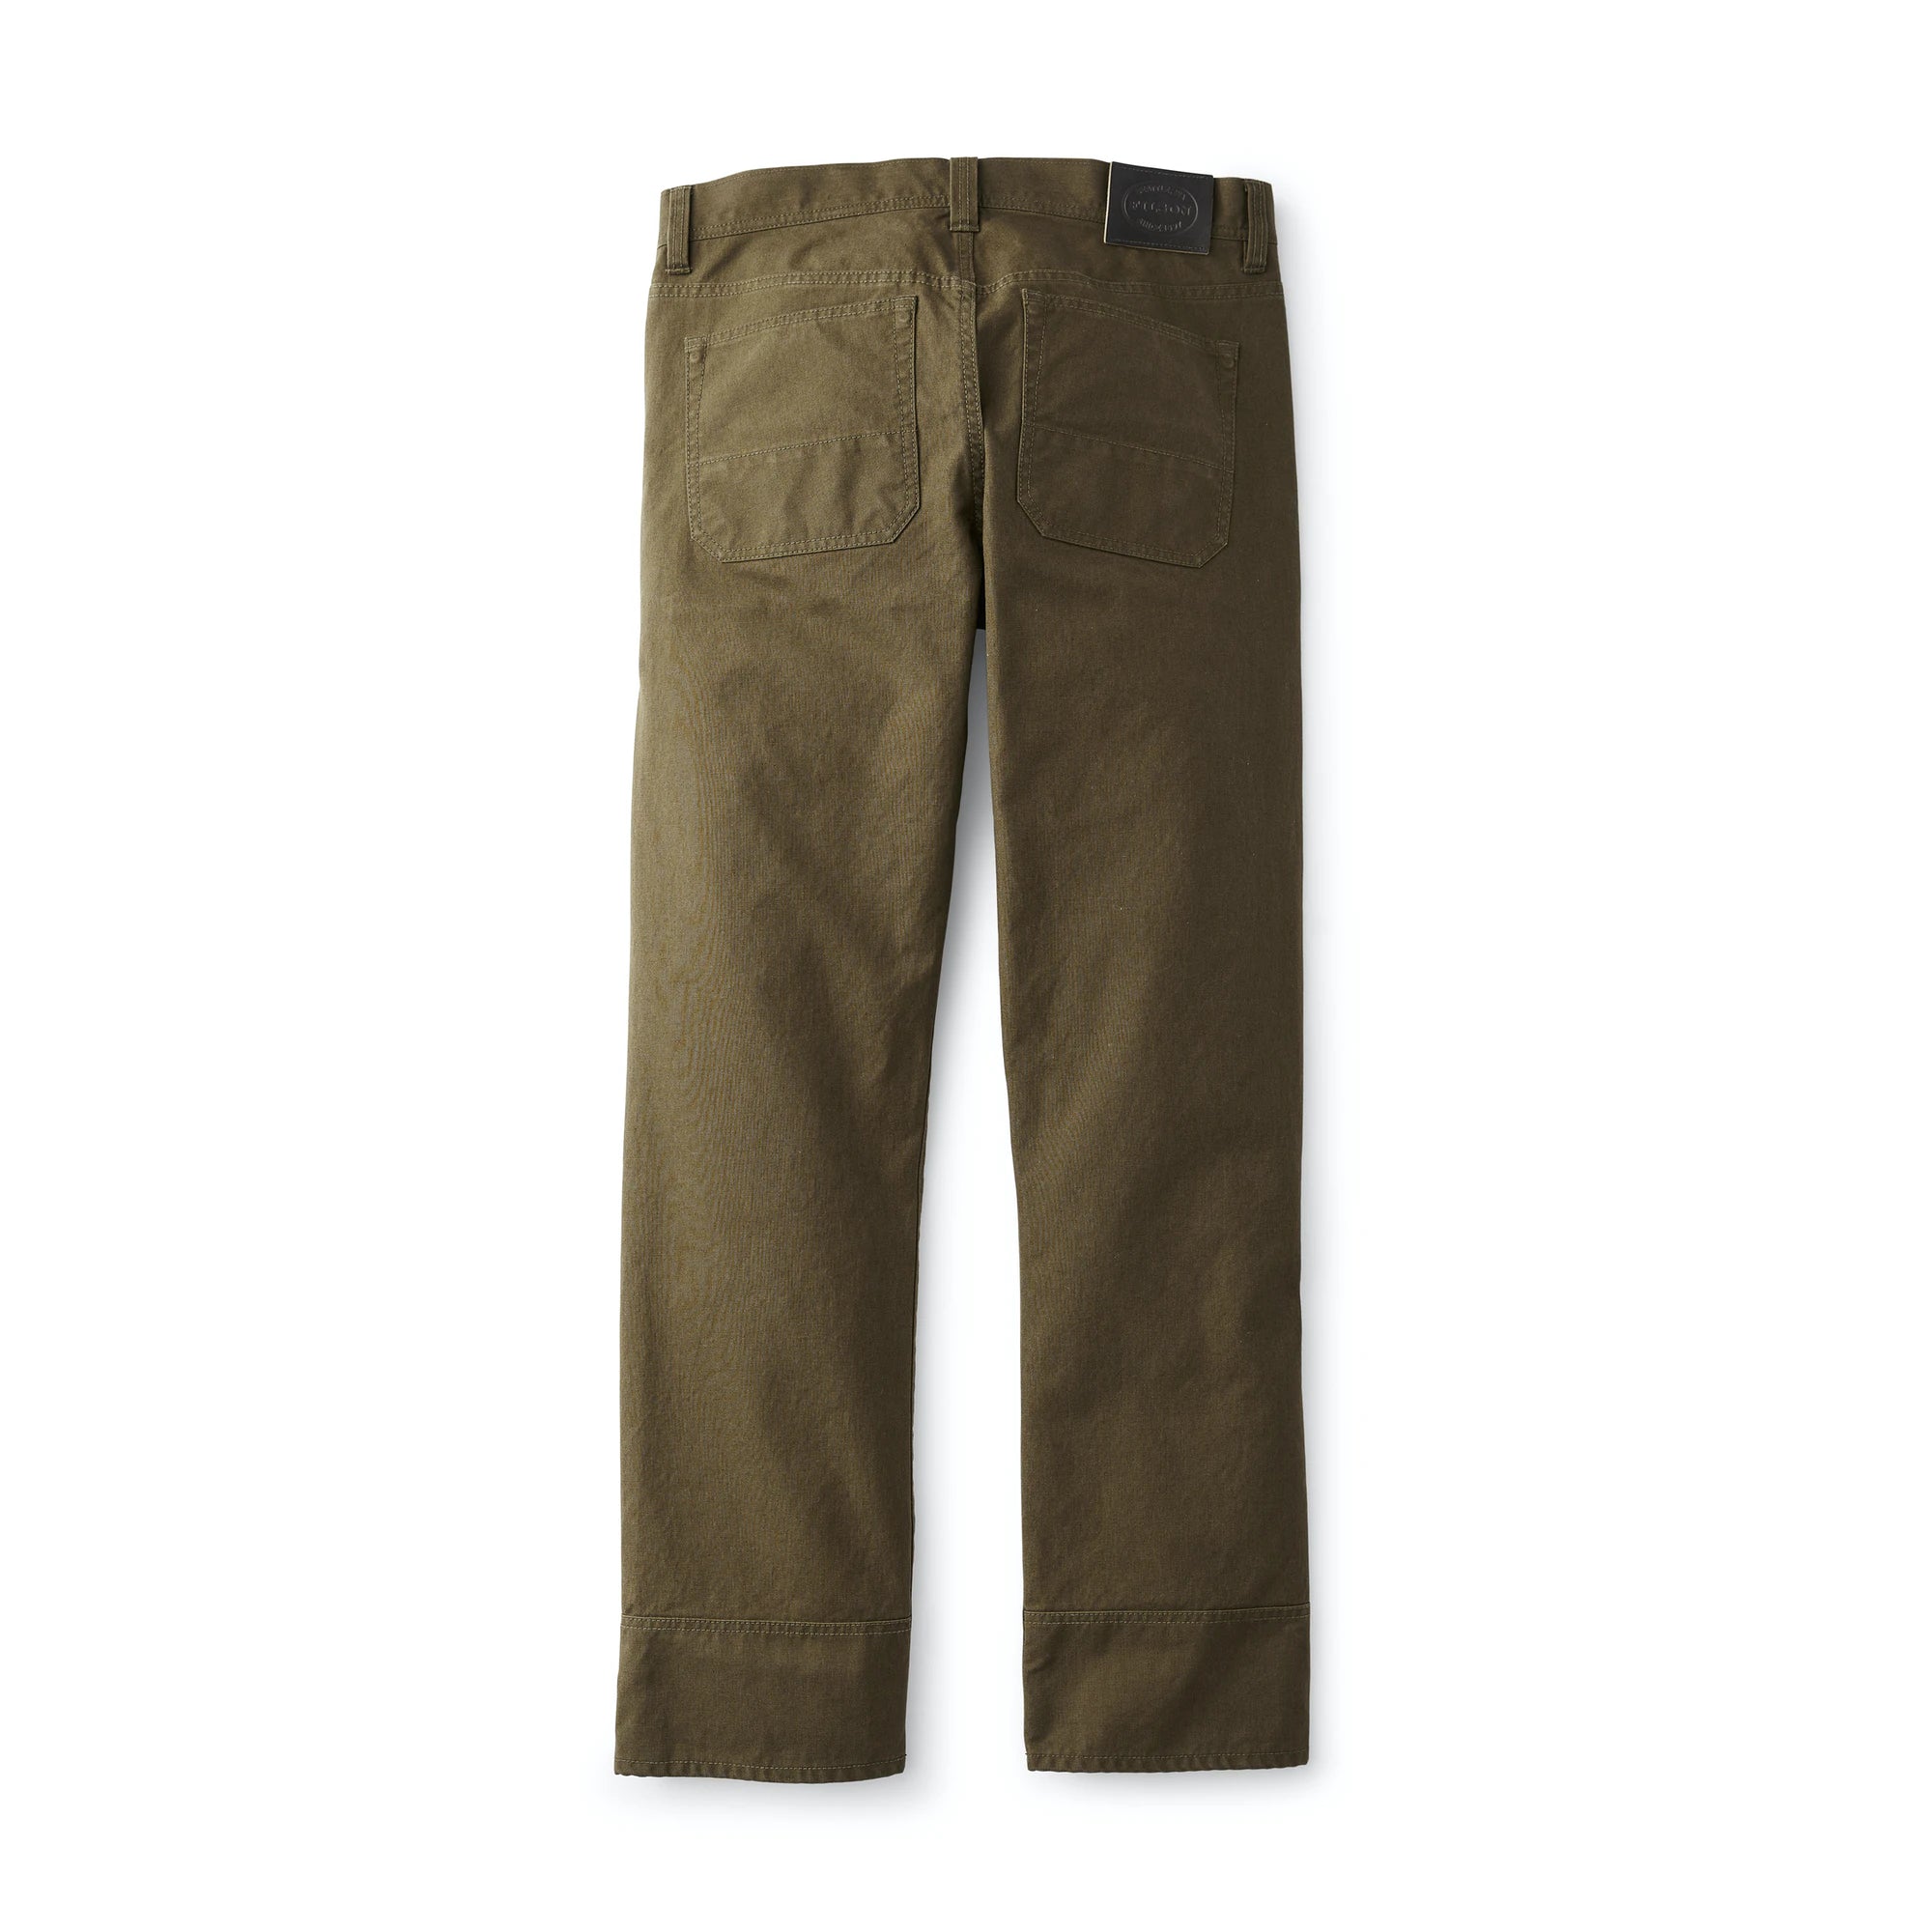 Double Front Dry Tin 5 Pocket Utility Pant "MarshOlive"